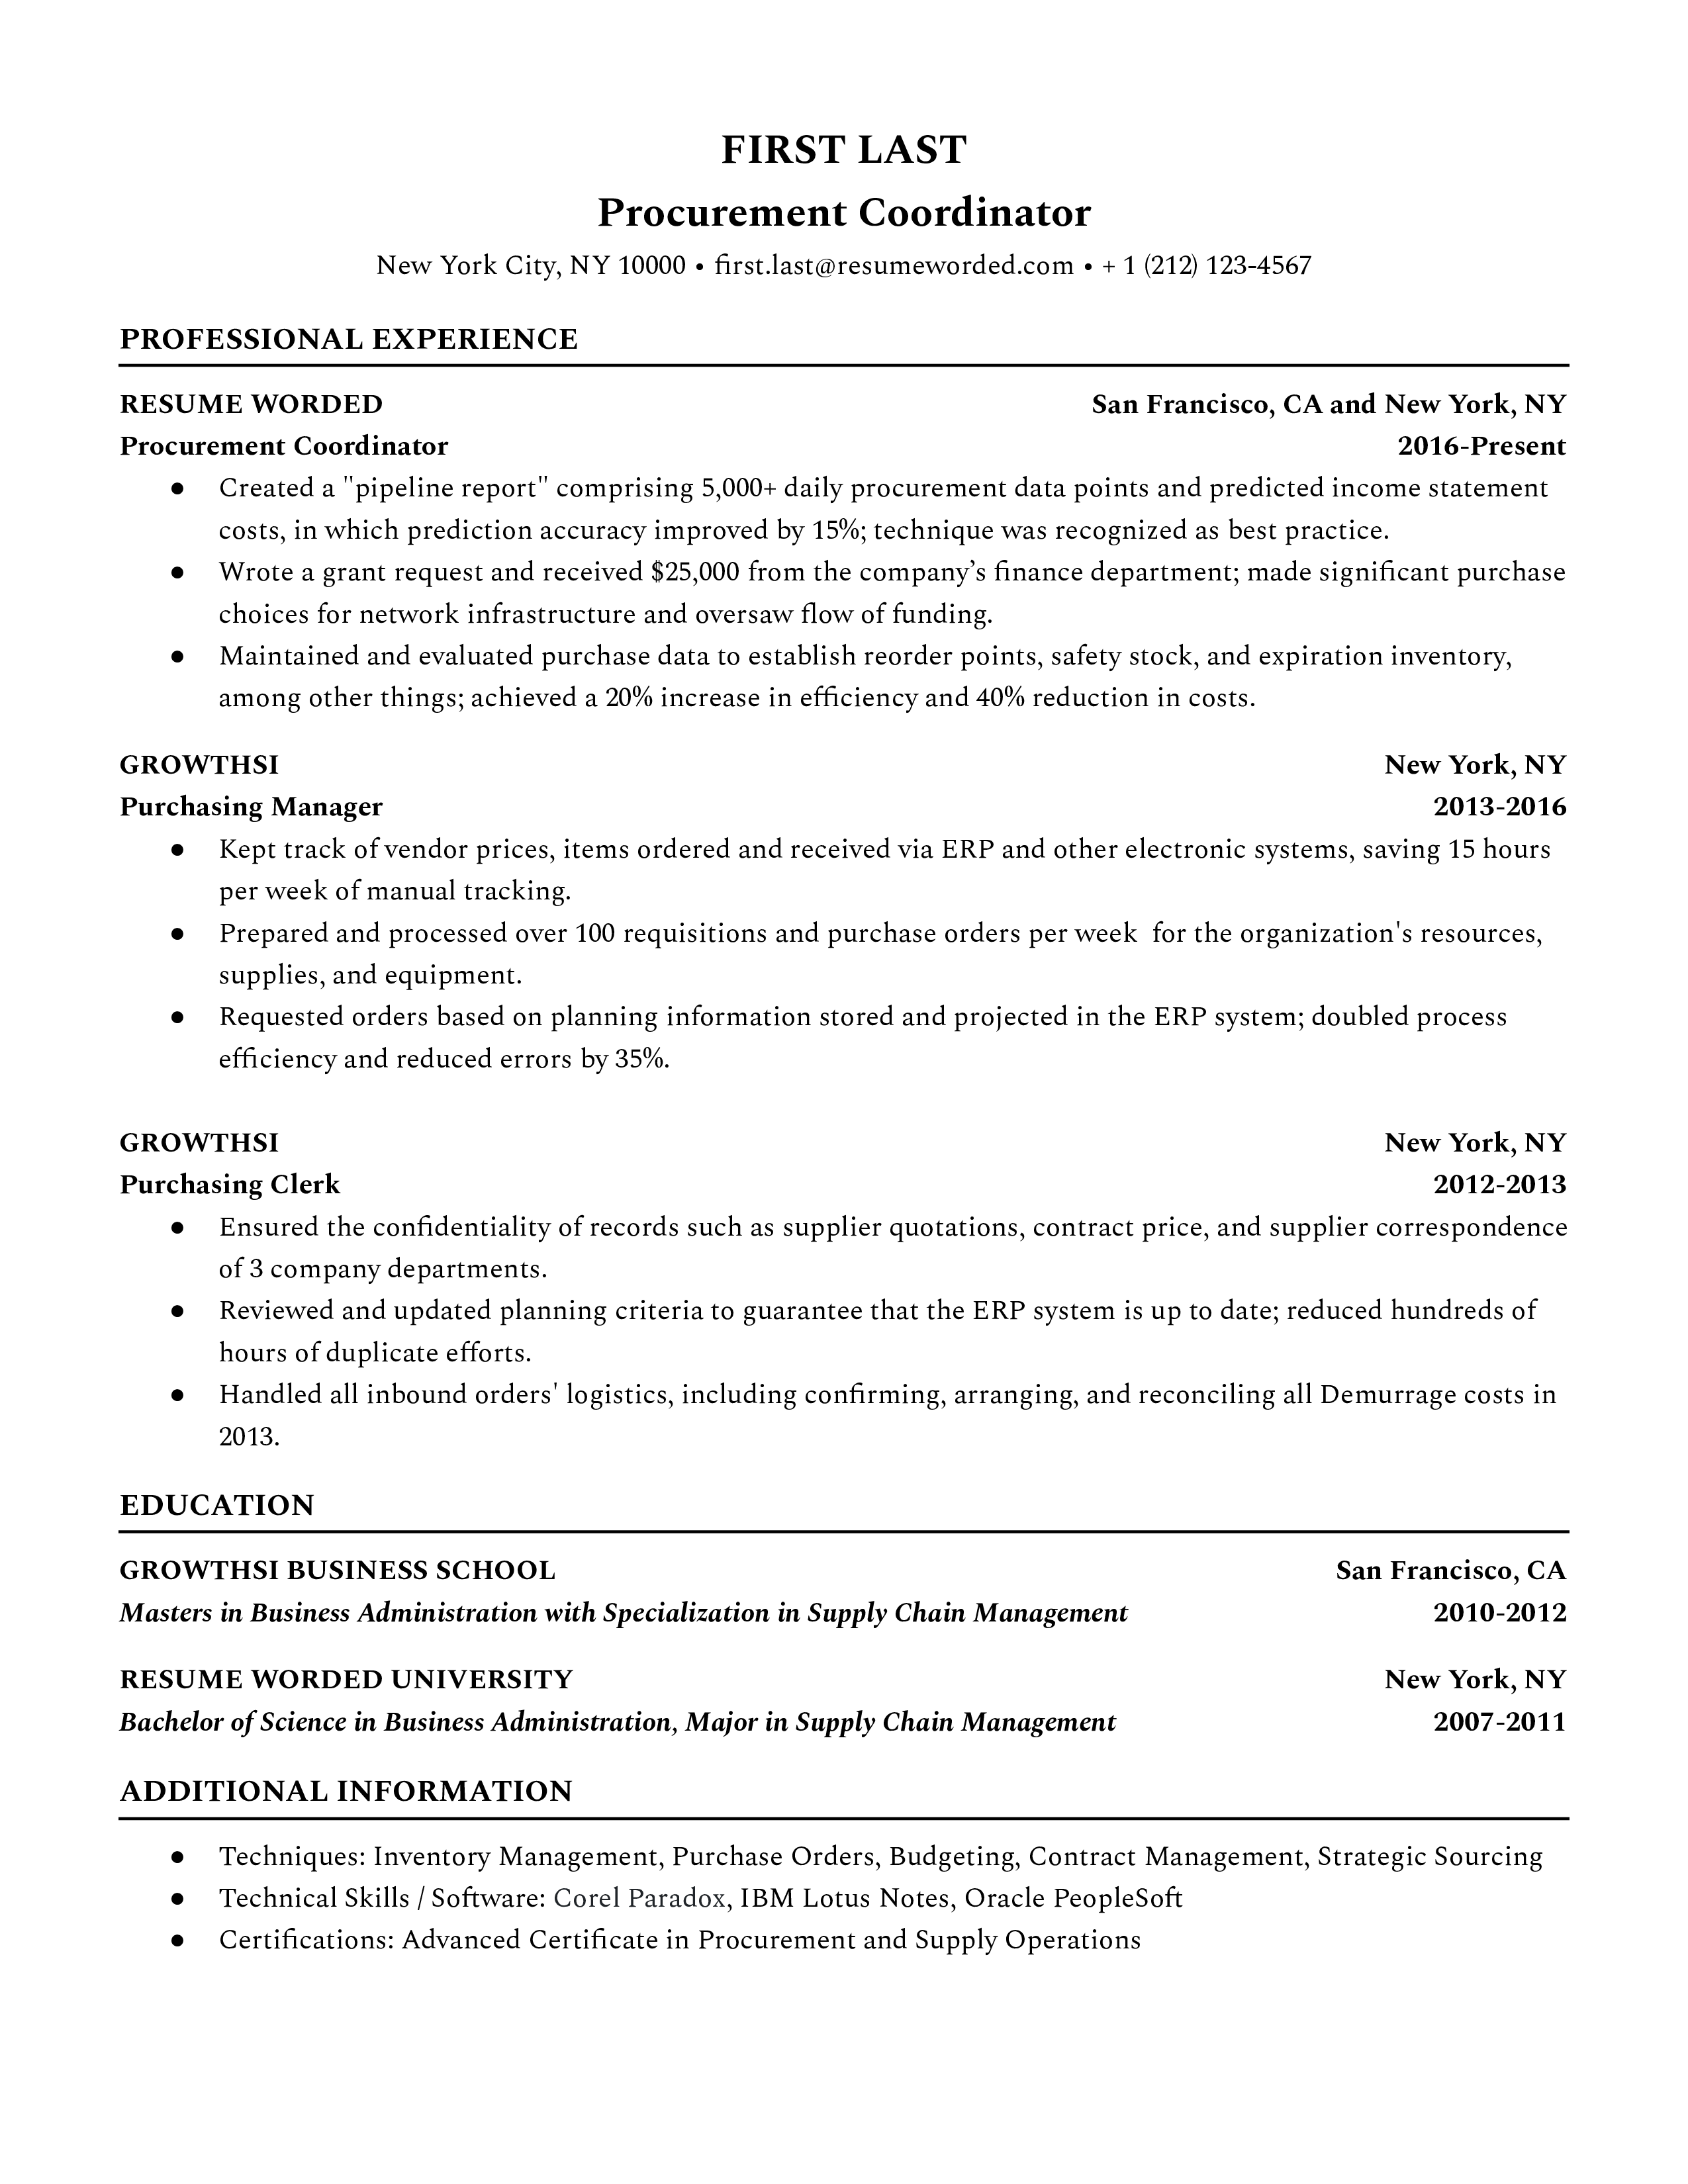 A procurement coordinator resume template that emphasizes work experience and education